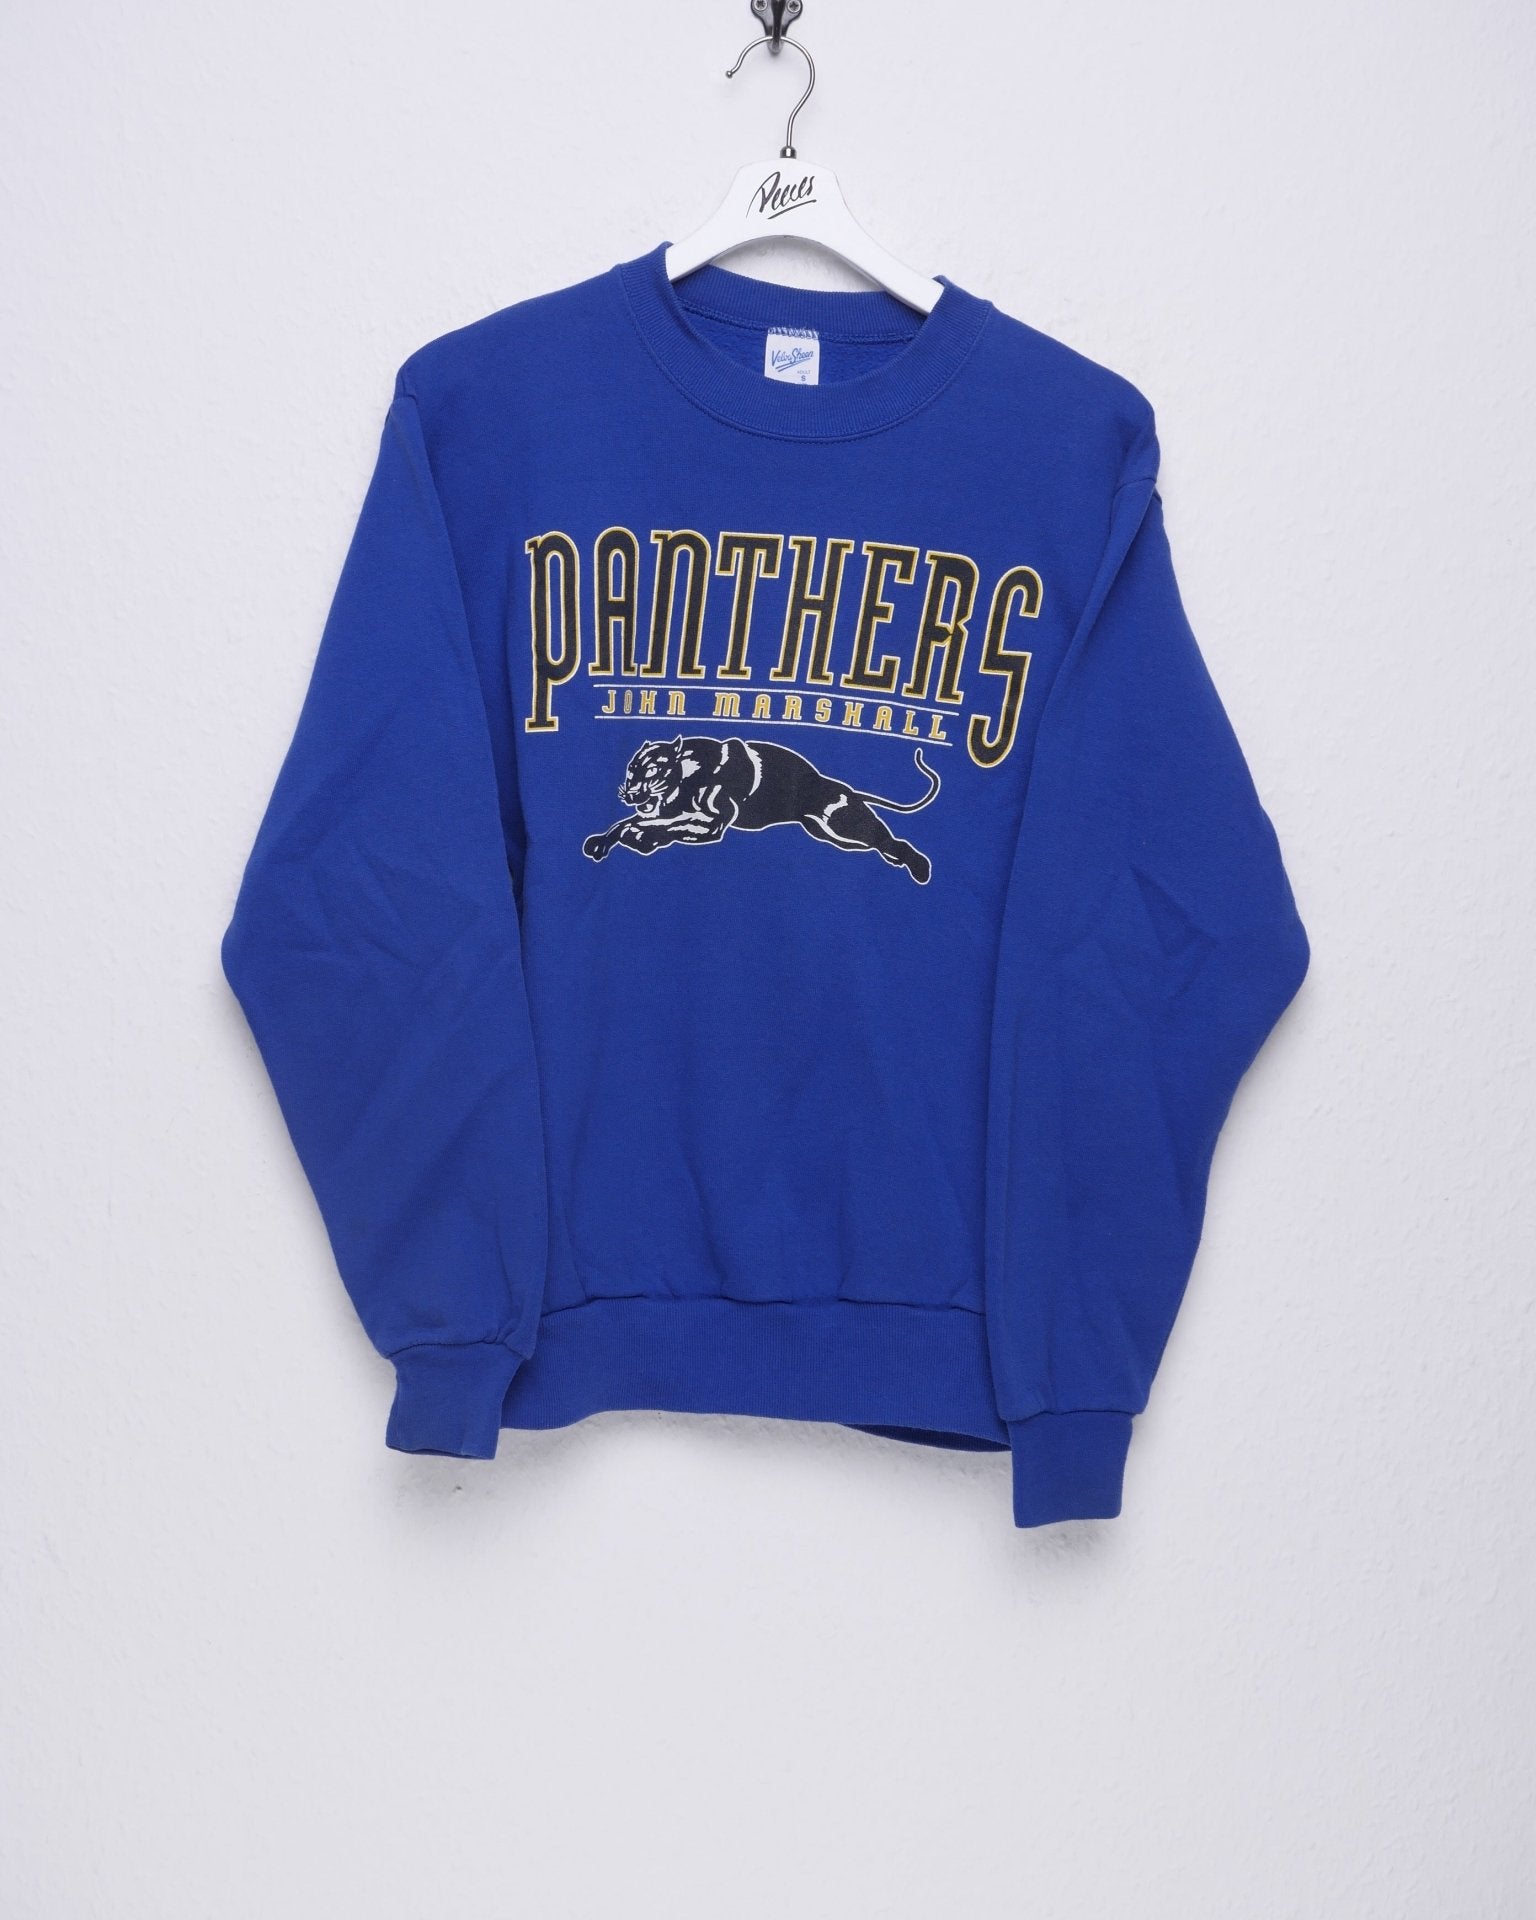 printed Panthers NFL Logo blue Sweater - Peeces